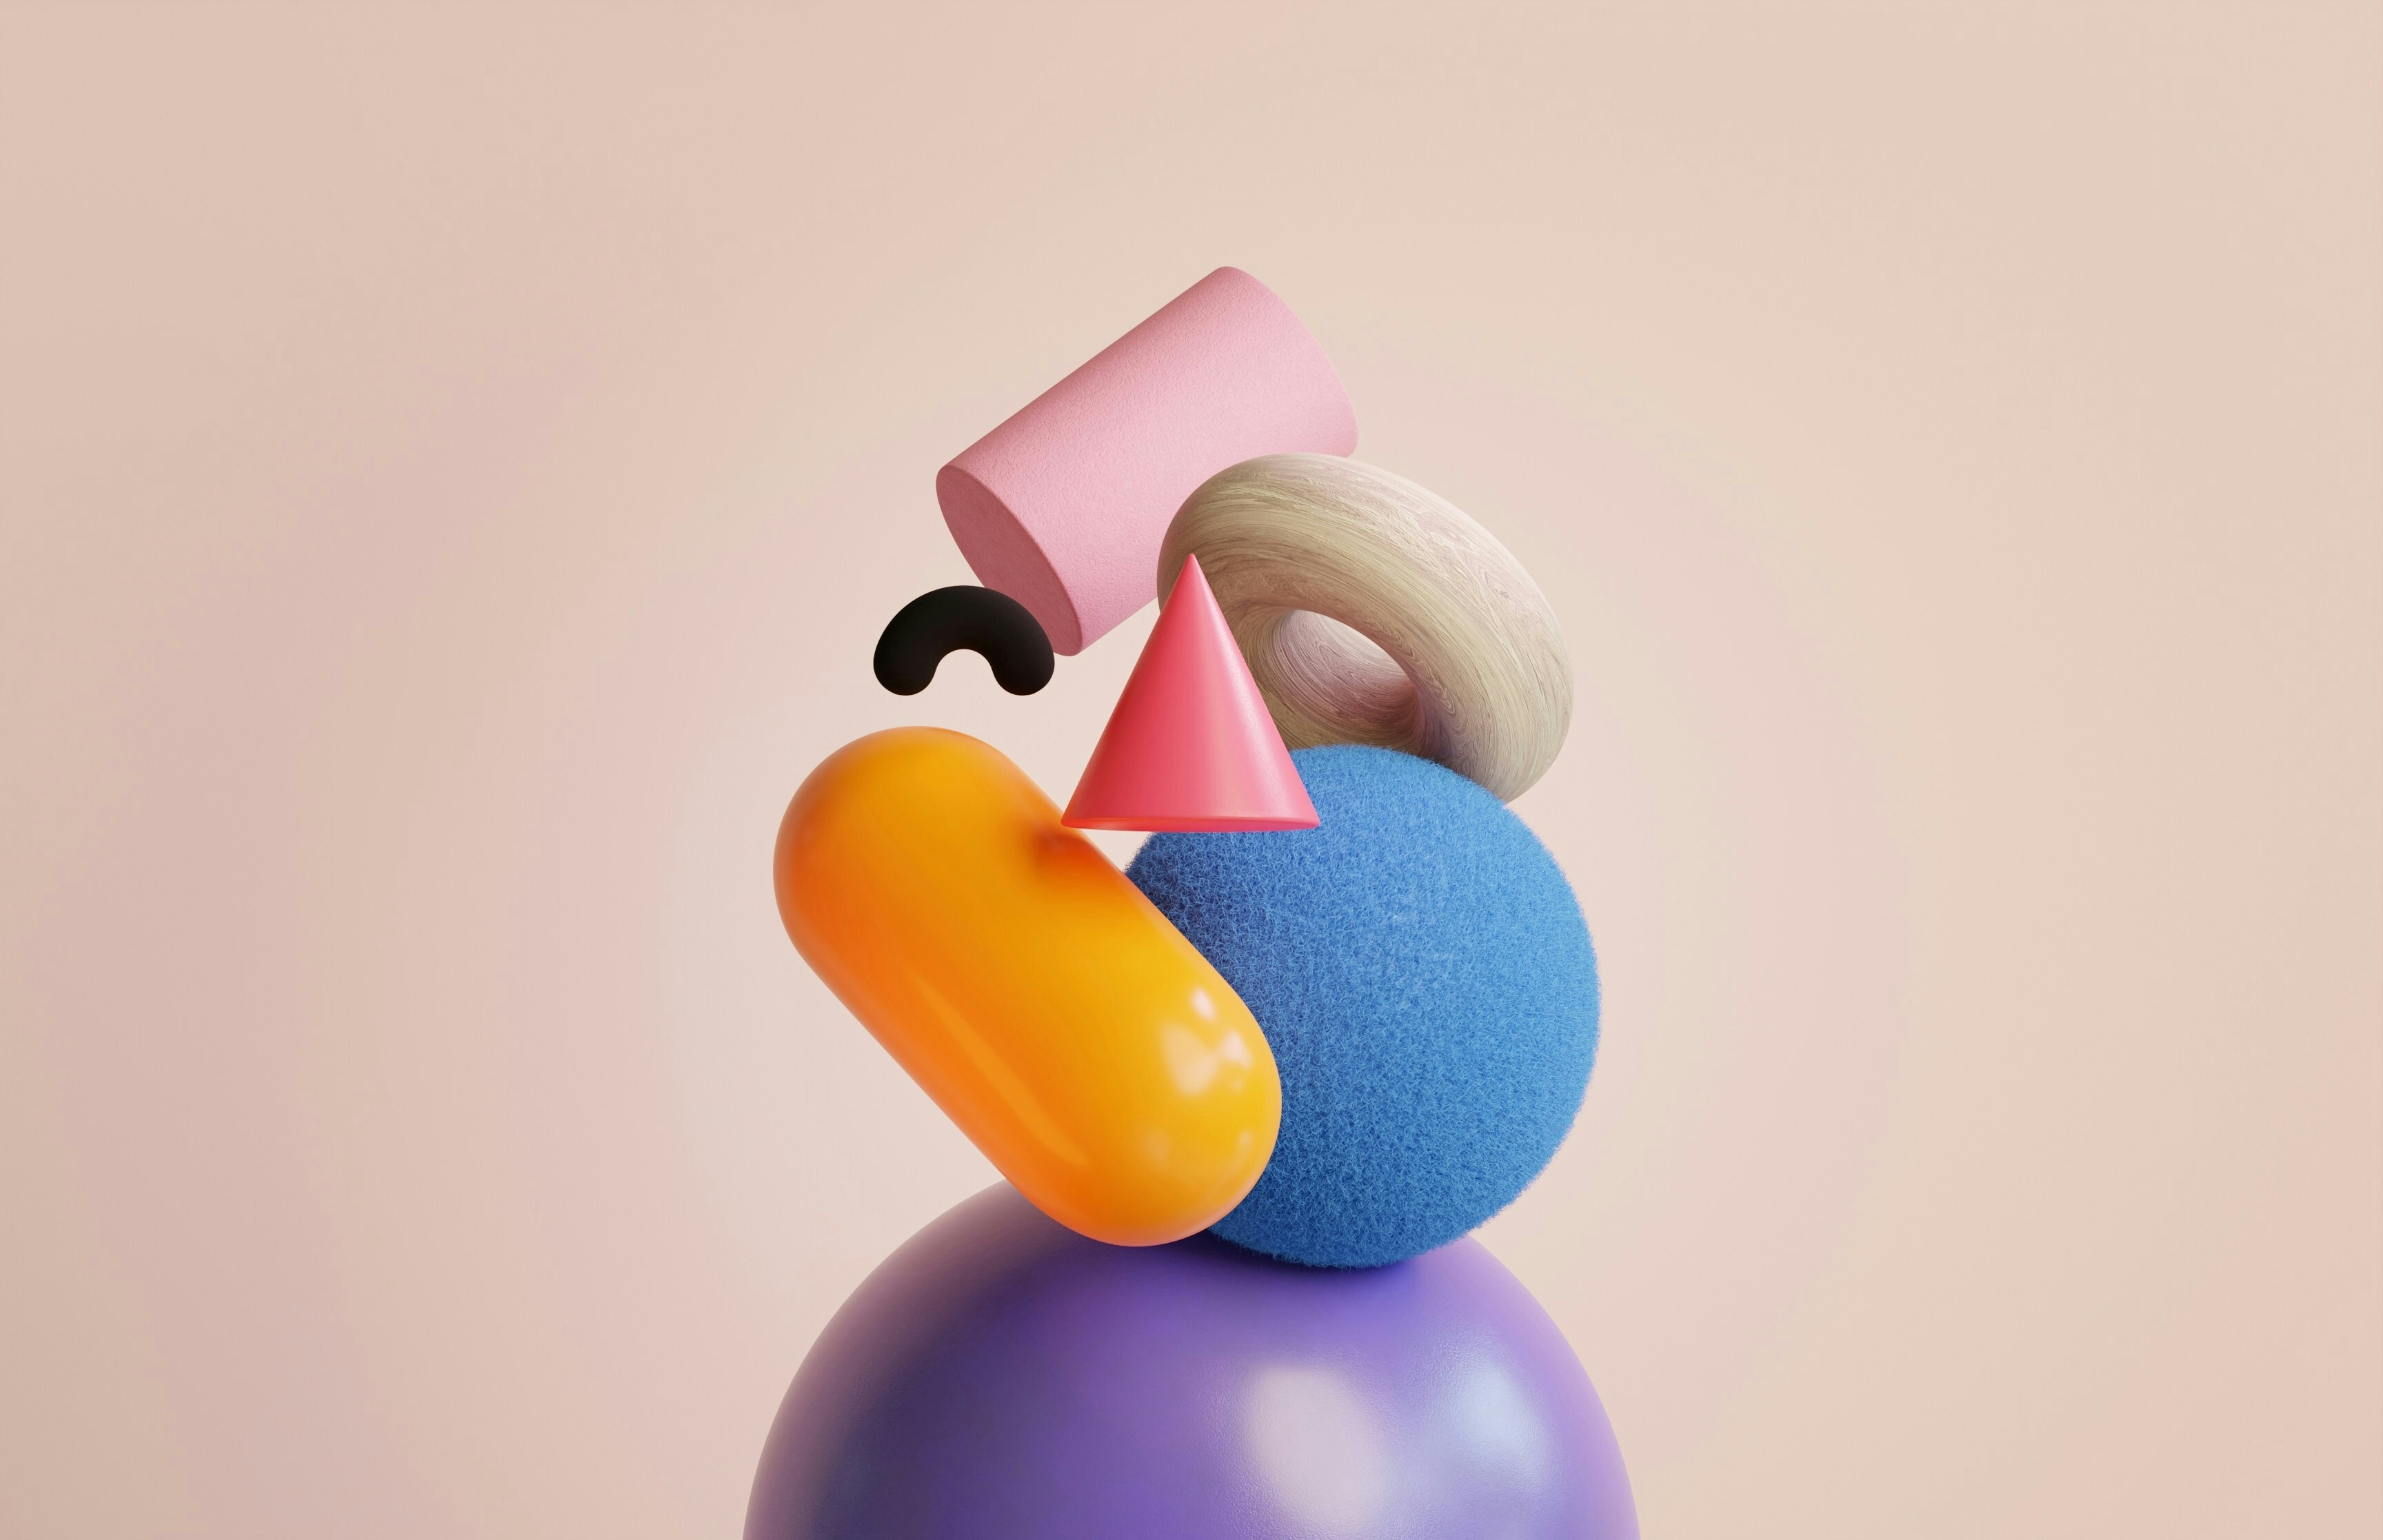 The image features a balanced arrangement of colorful, abstract 3D shapes against a soft, light pink background. The shapes include a large purple sphere at the bottom, a blue textured sphere above it, a cylindrical pink shape, an orange capsule-like shape, a beige torus, a pink cone, and a small black curved shape. The objects are stacked in an artful and visually intriguing manner, creating a sense of playful balance and composition.